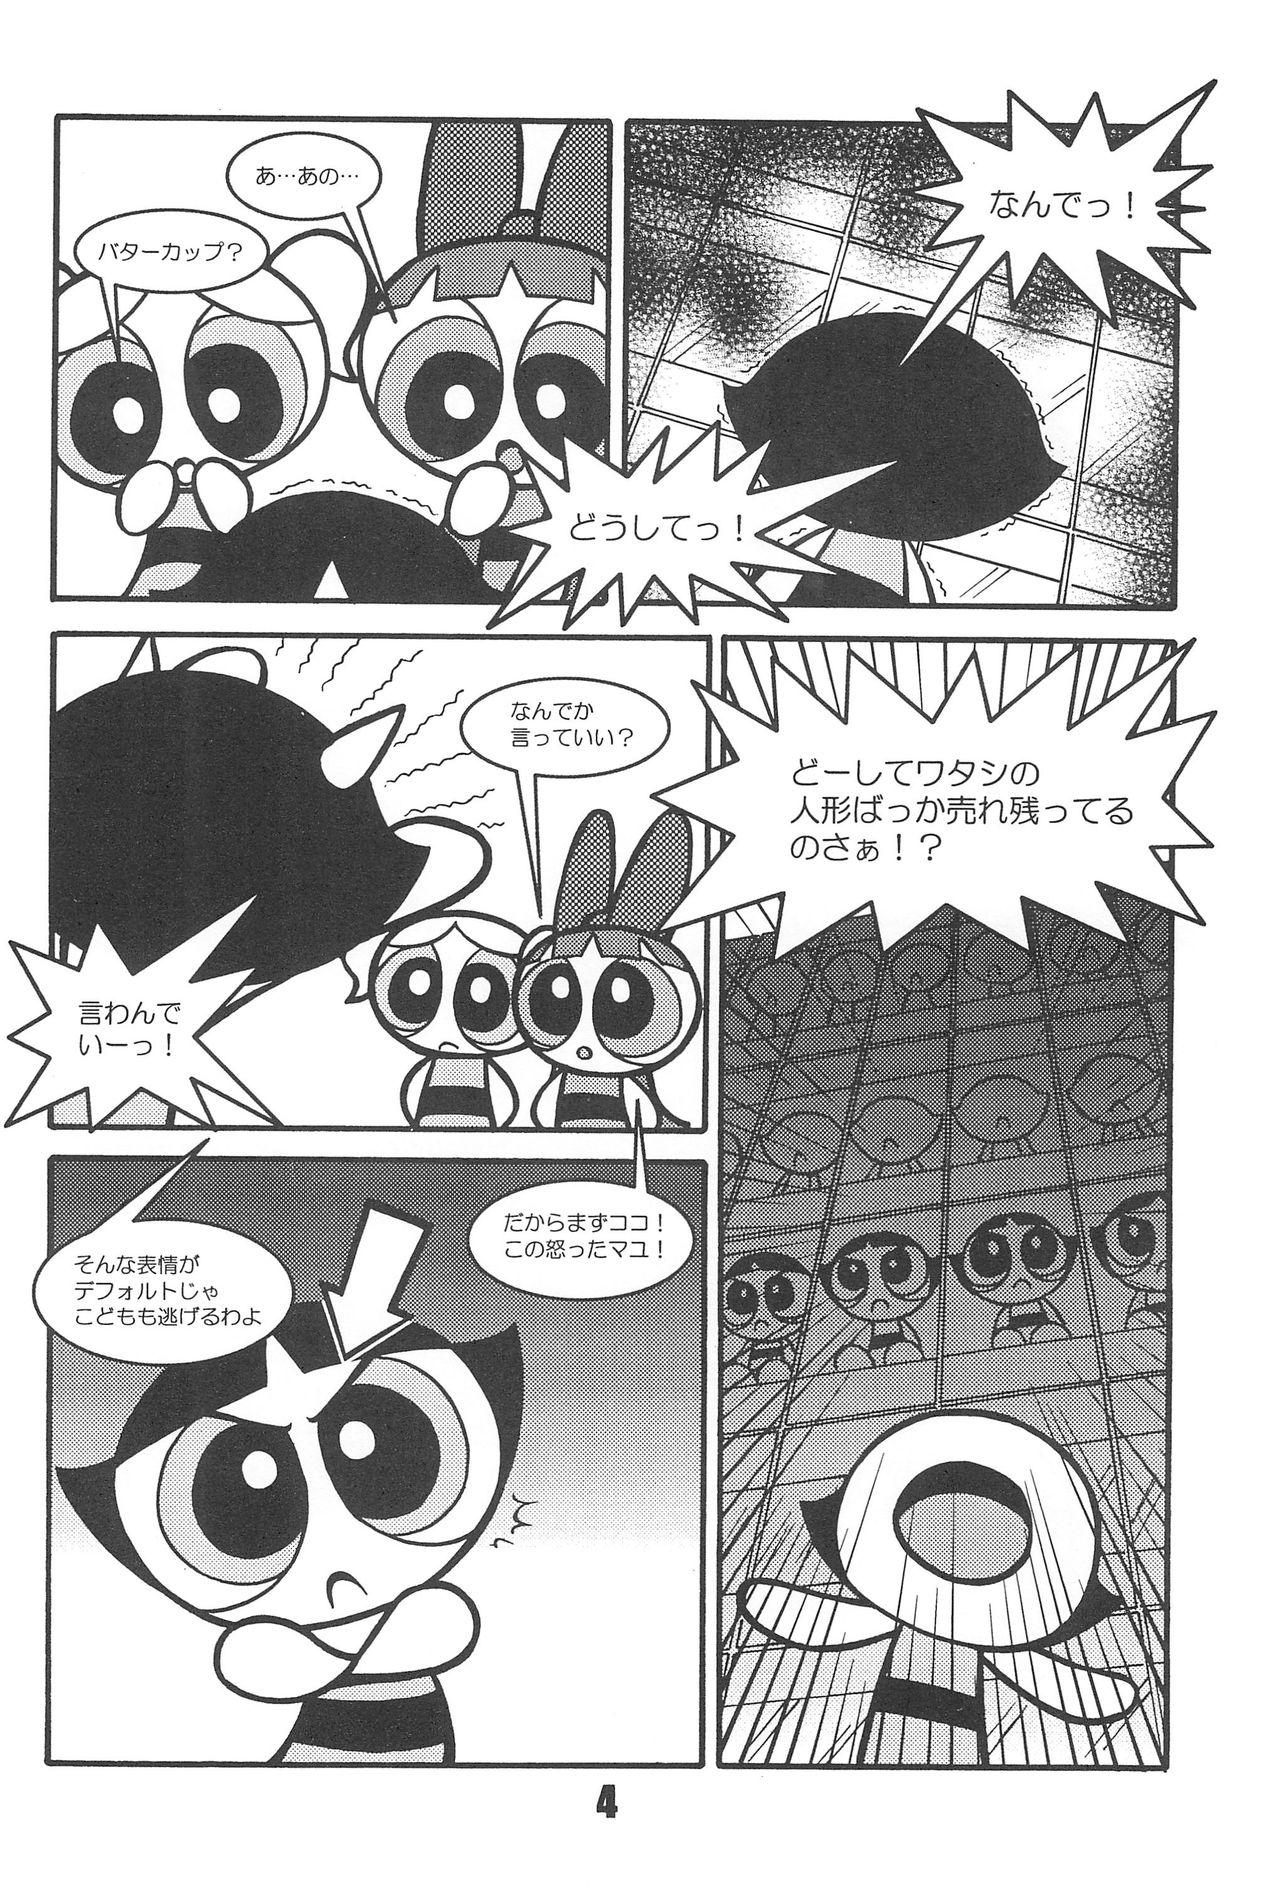 Tgirl Show Goes On! Funhouse 22th - The powerpuff girls Gapes Gaping Asshole - Page 4